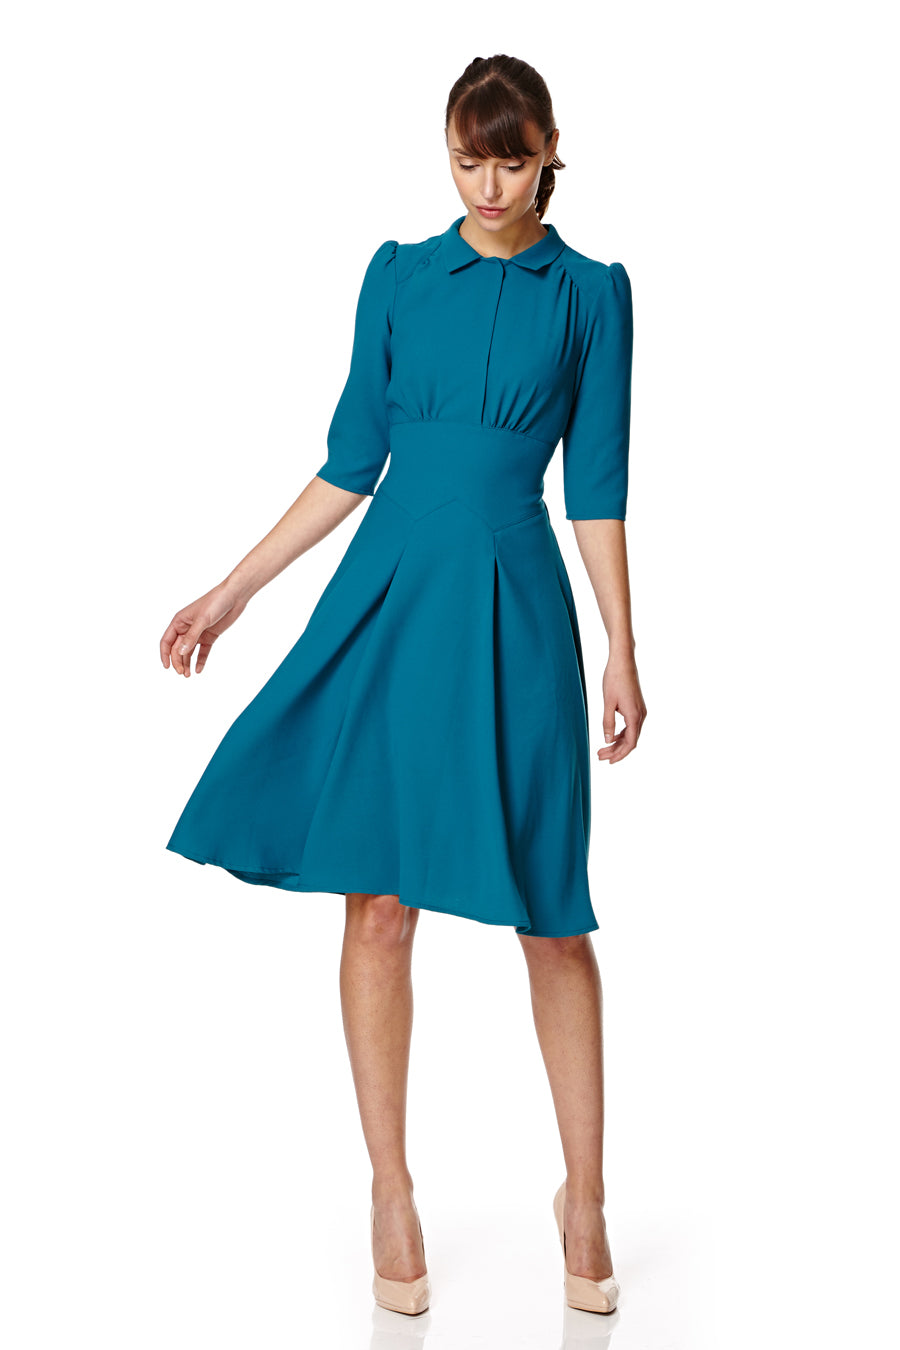 The Dorothy in teal crepe